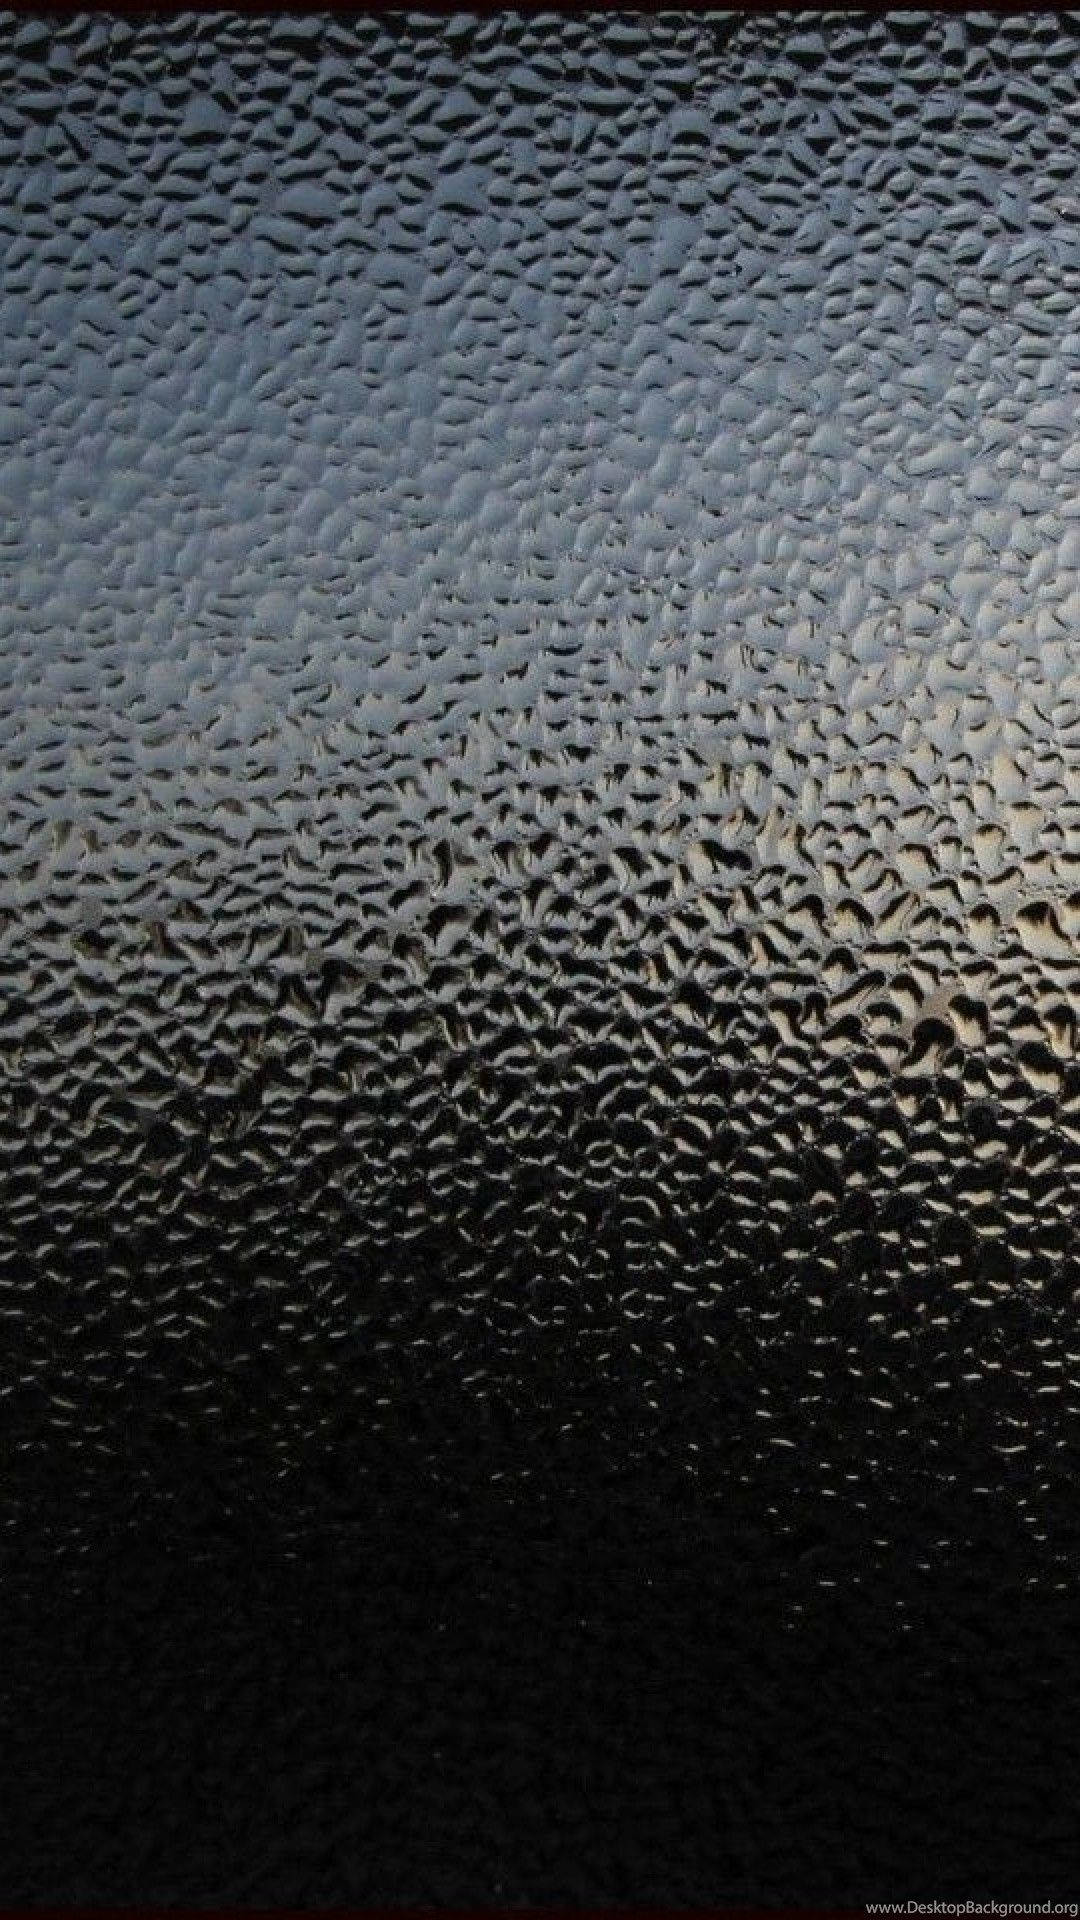 Shiny Textured Black Leather iPhone Wallpaper